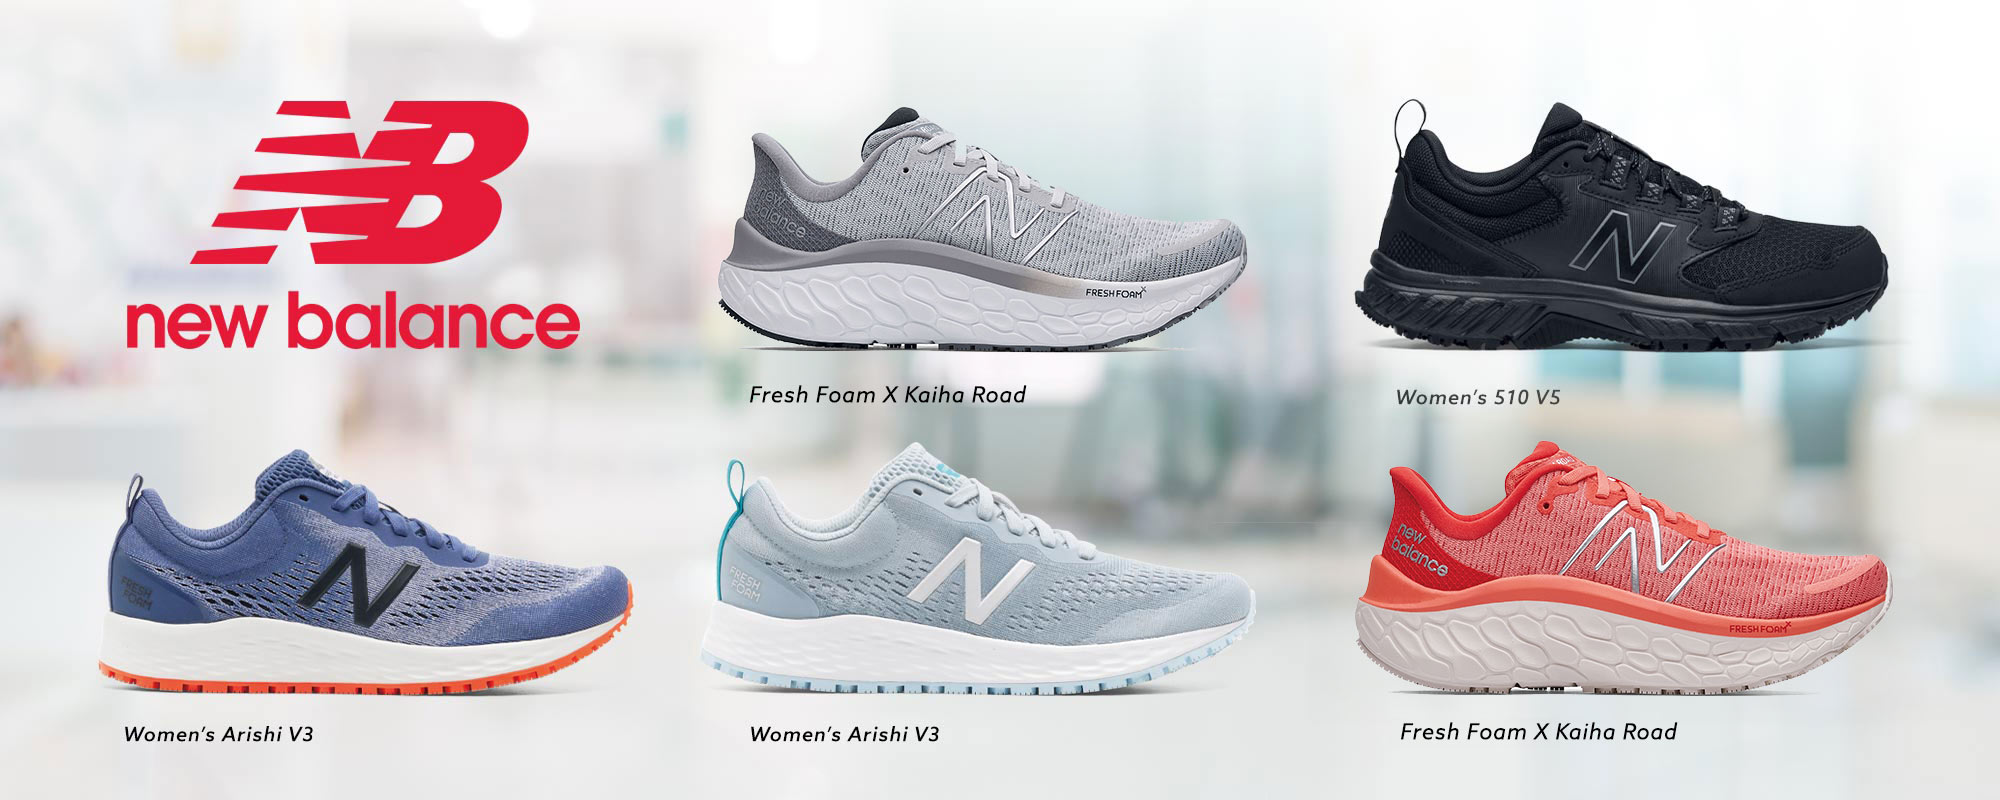 Shoes For Crews and New Balance Team to Bring Healthcare Professionals Comfortable and Safe New Balance Shoes with Shoes For Crews slip-resistant outsole – Shop Women’s and Men’s New Balance and Shoes For Crews collaboration now. 